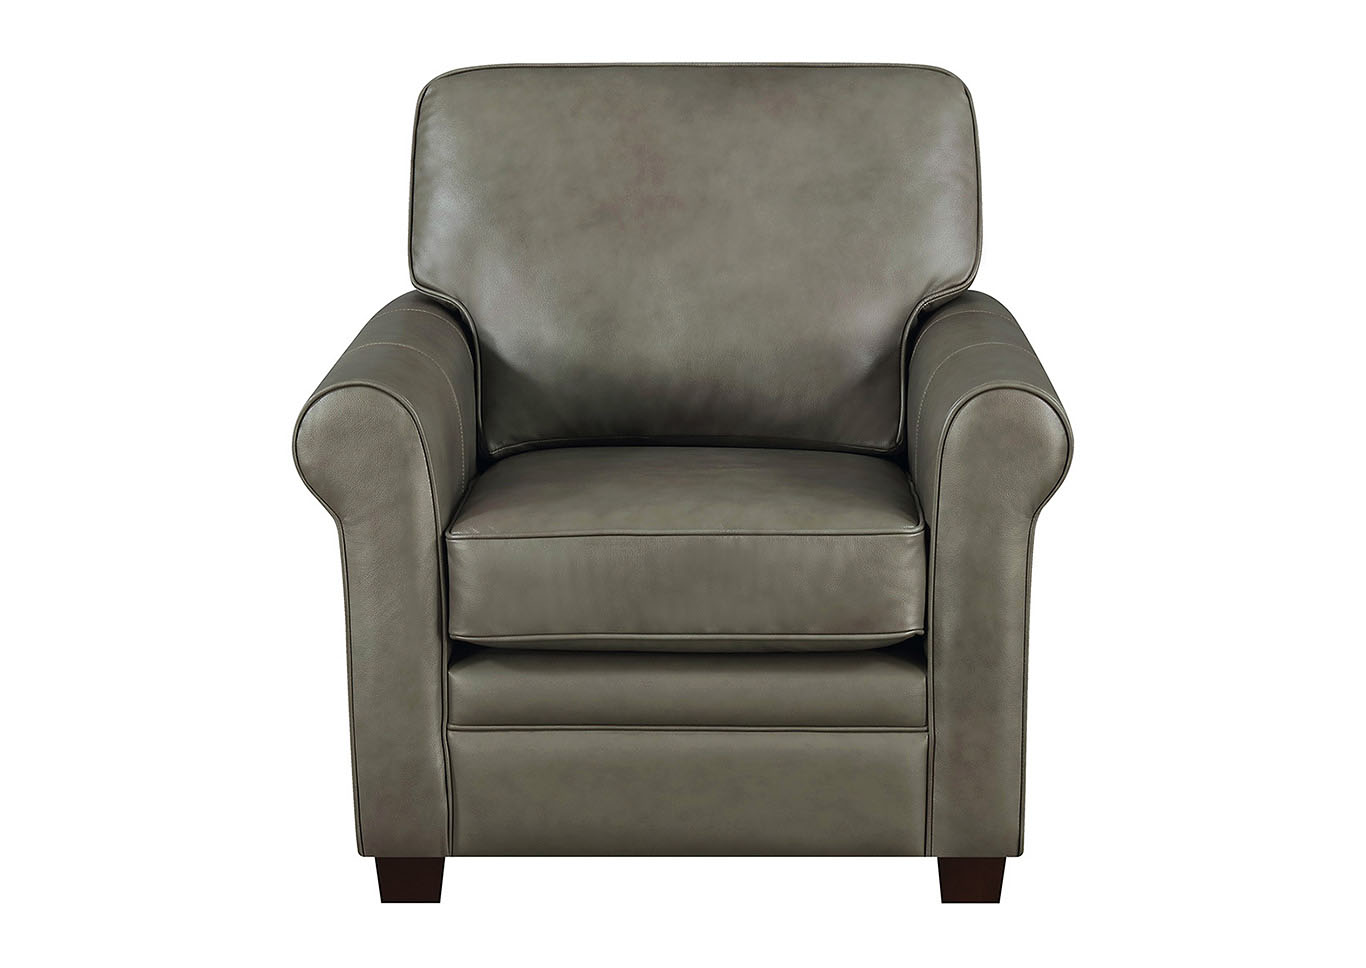 April Gray Leather Match Stationary Chair,Taba Home Furnishings